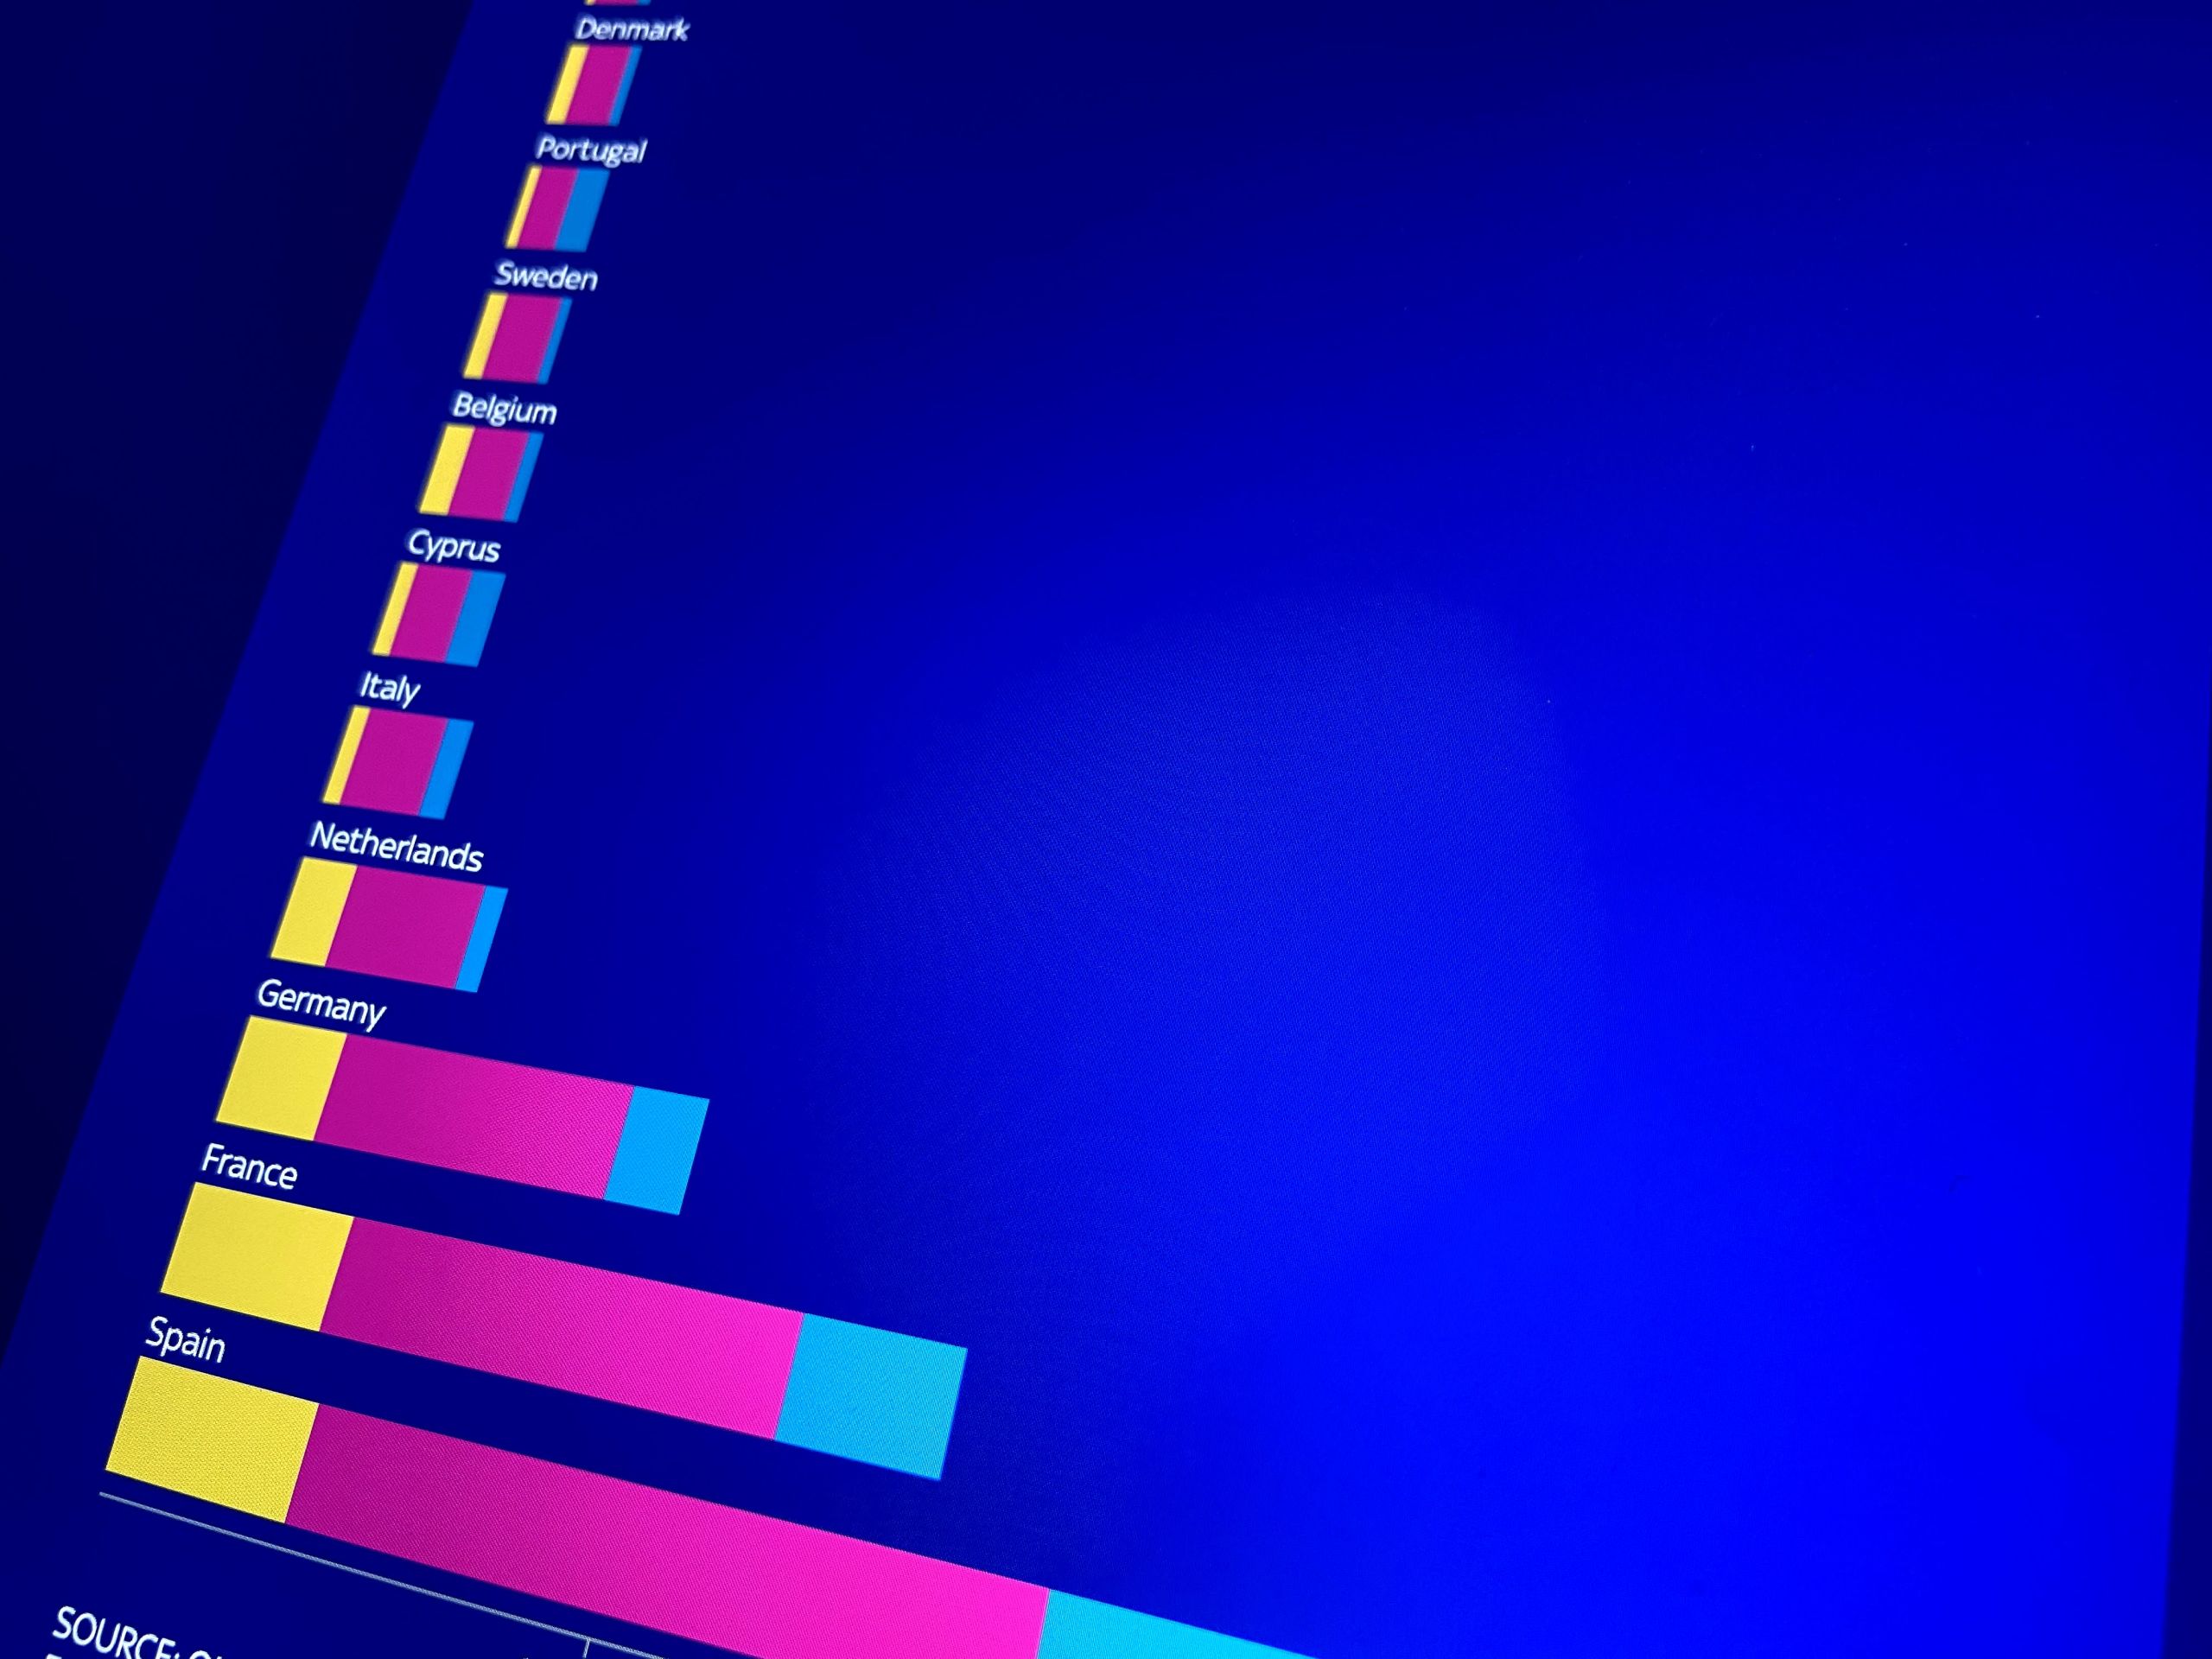 Background image of a multi-colour bar chart infographic, with European countries as labels.